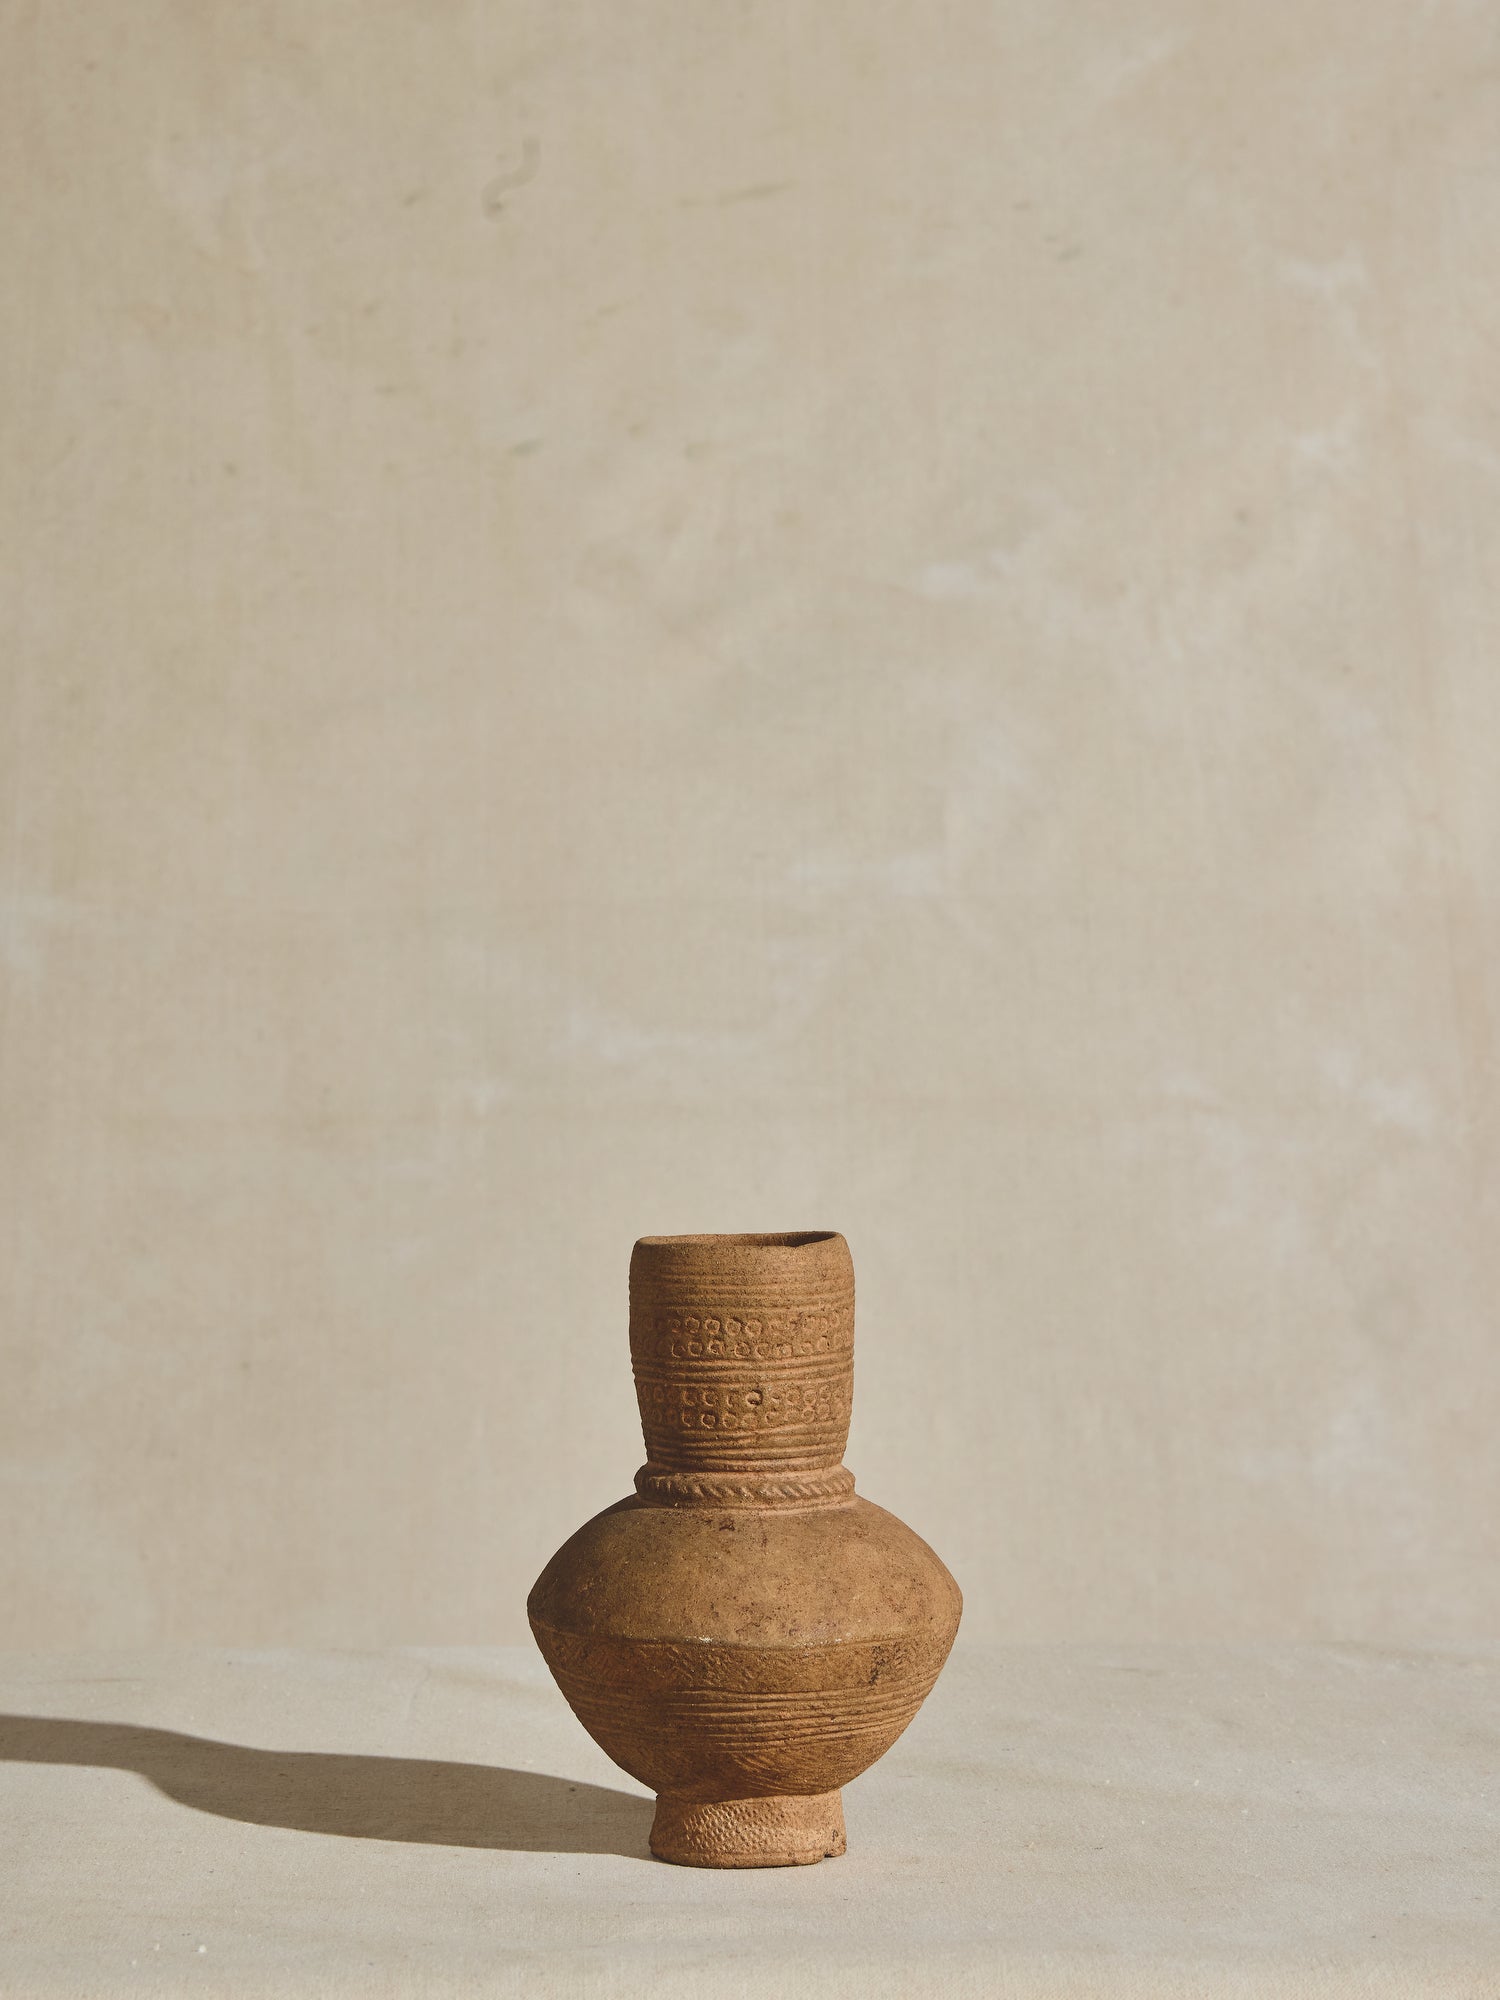 A hand carved African clay vessel, crafted in the 17th century with intricate etchings and a natural finish.